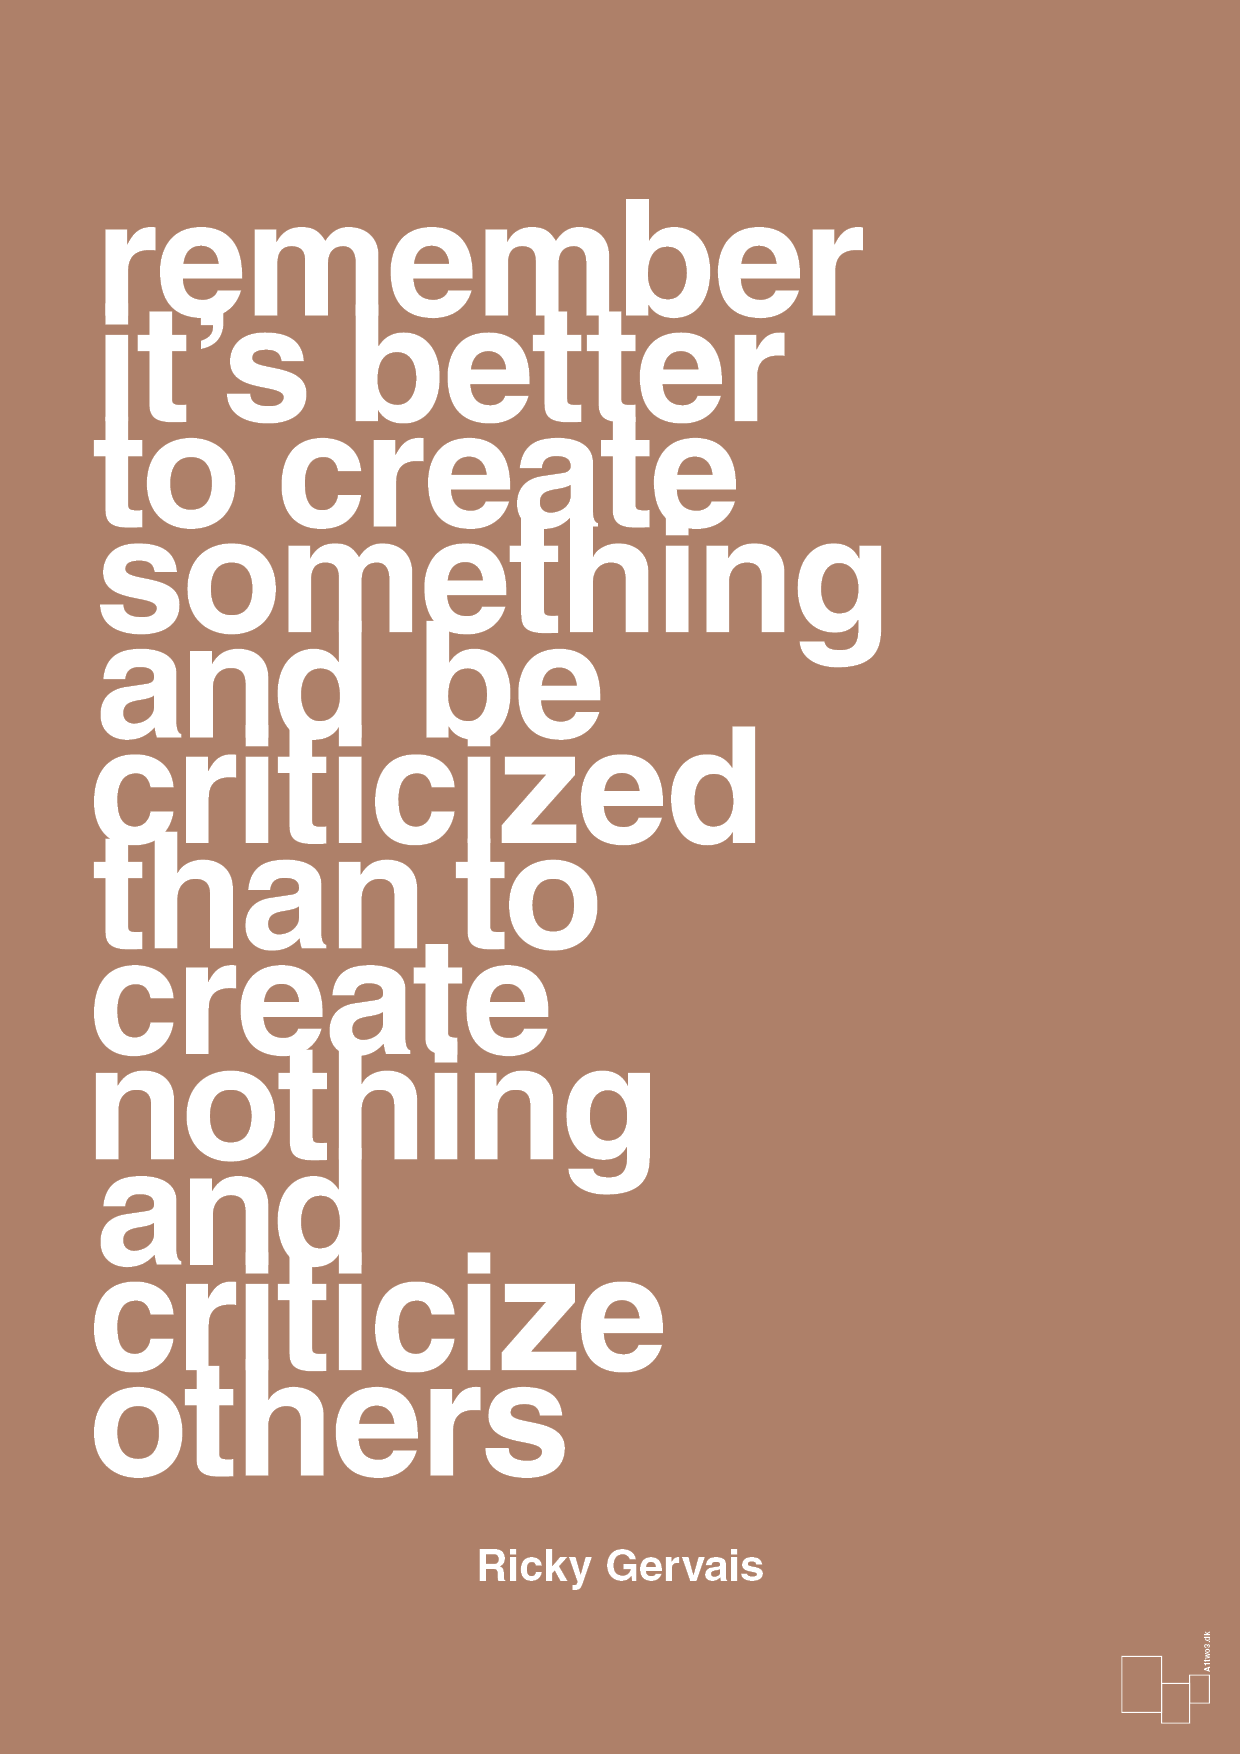 remember its better to create something and be criticized than create nothing and criticize others - Plakat med Citater i Cider Spice